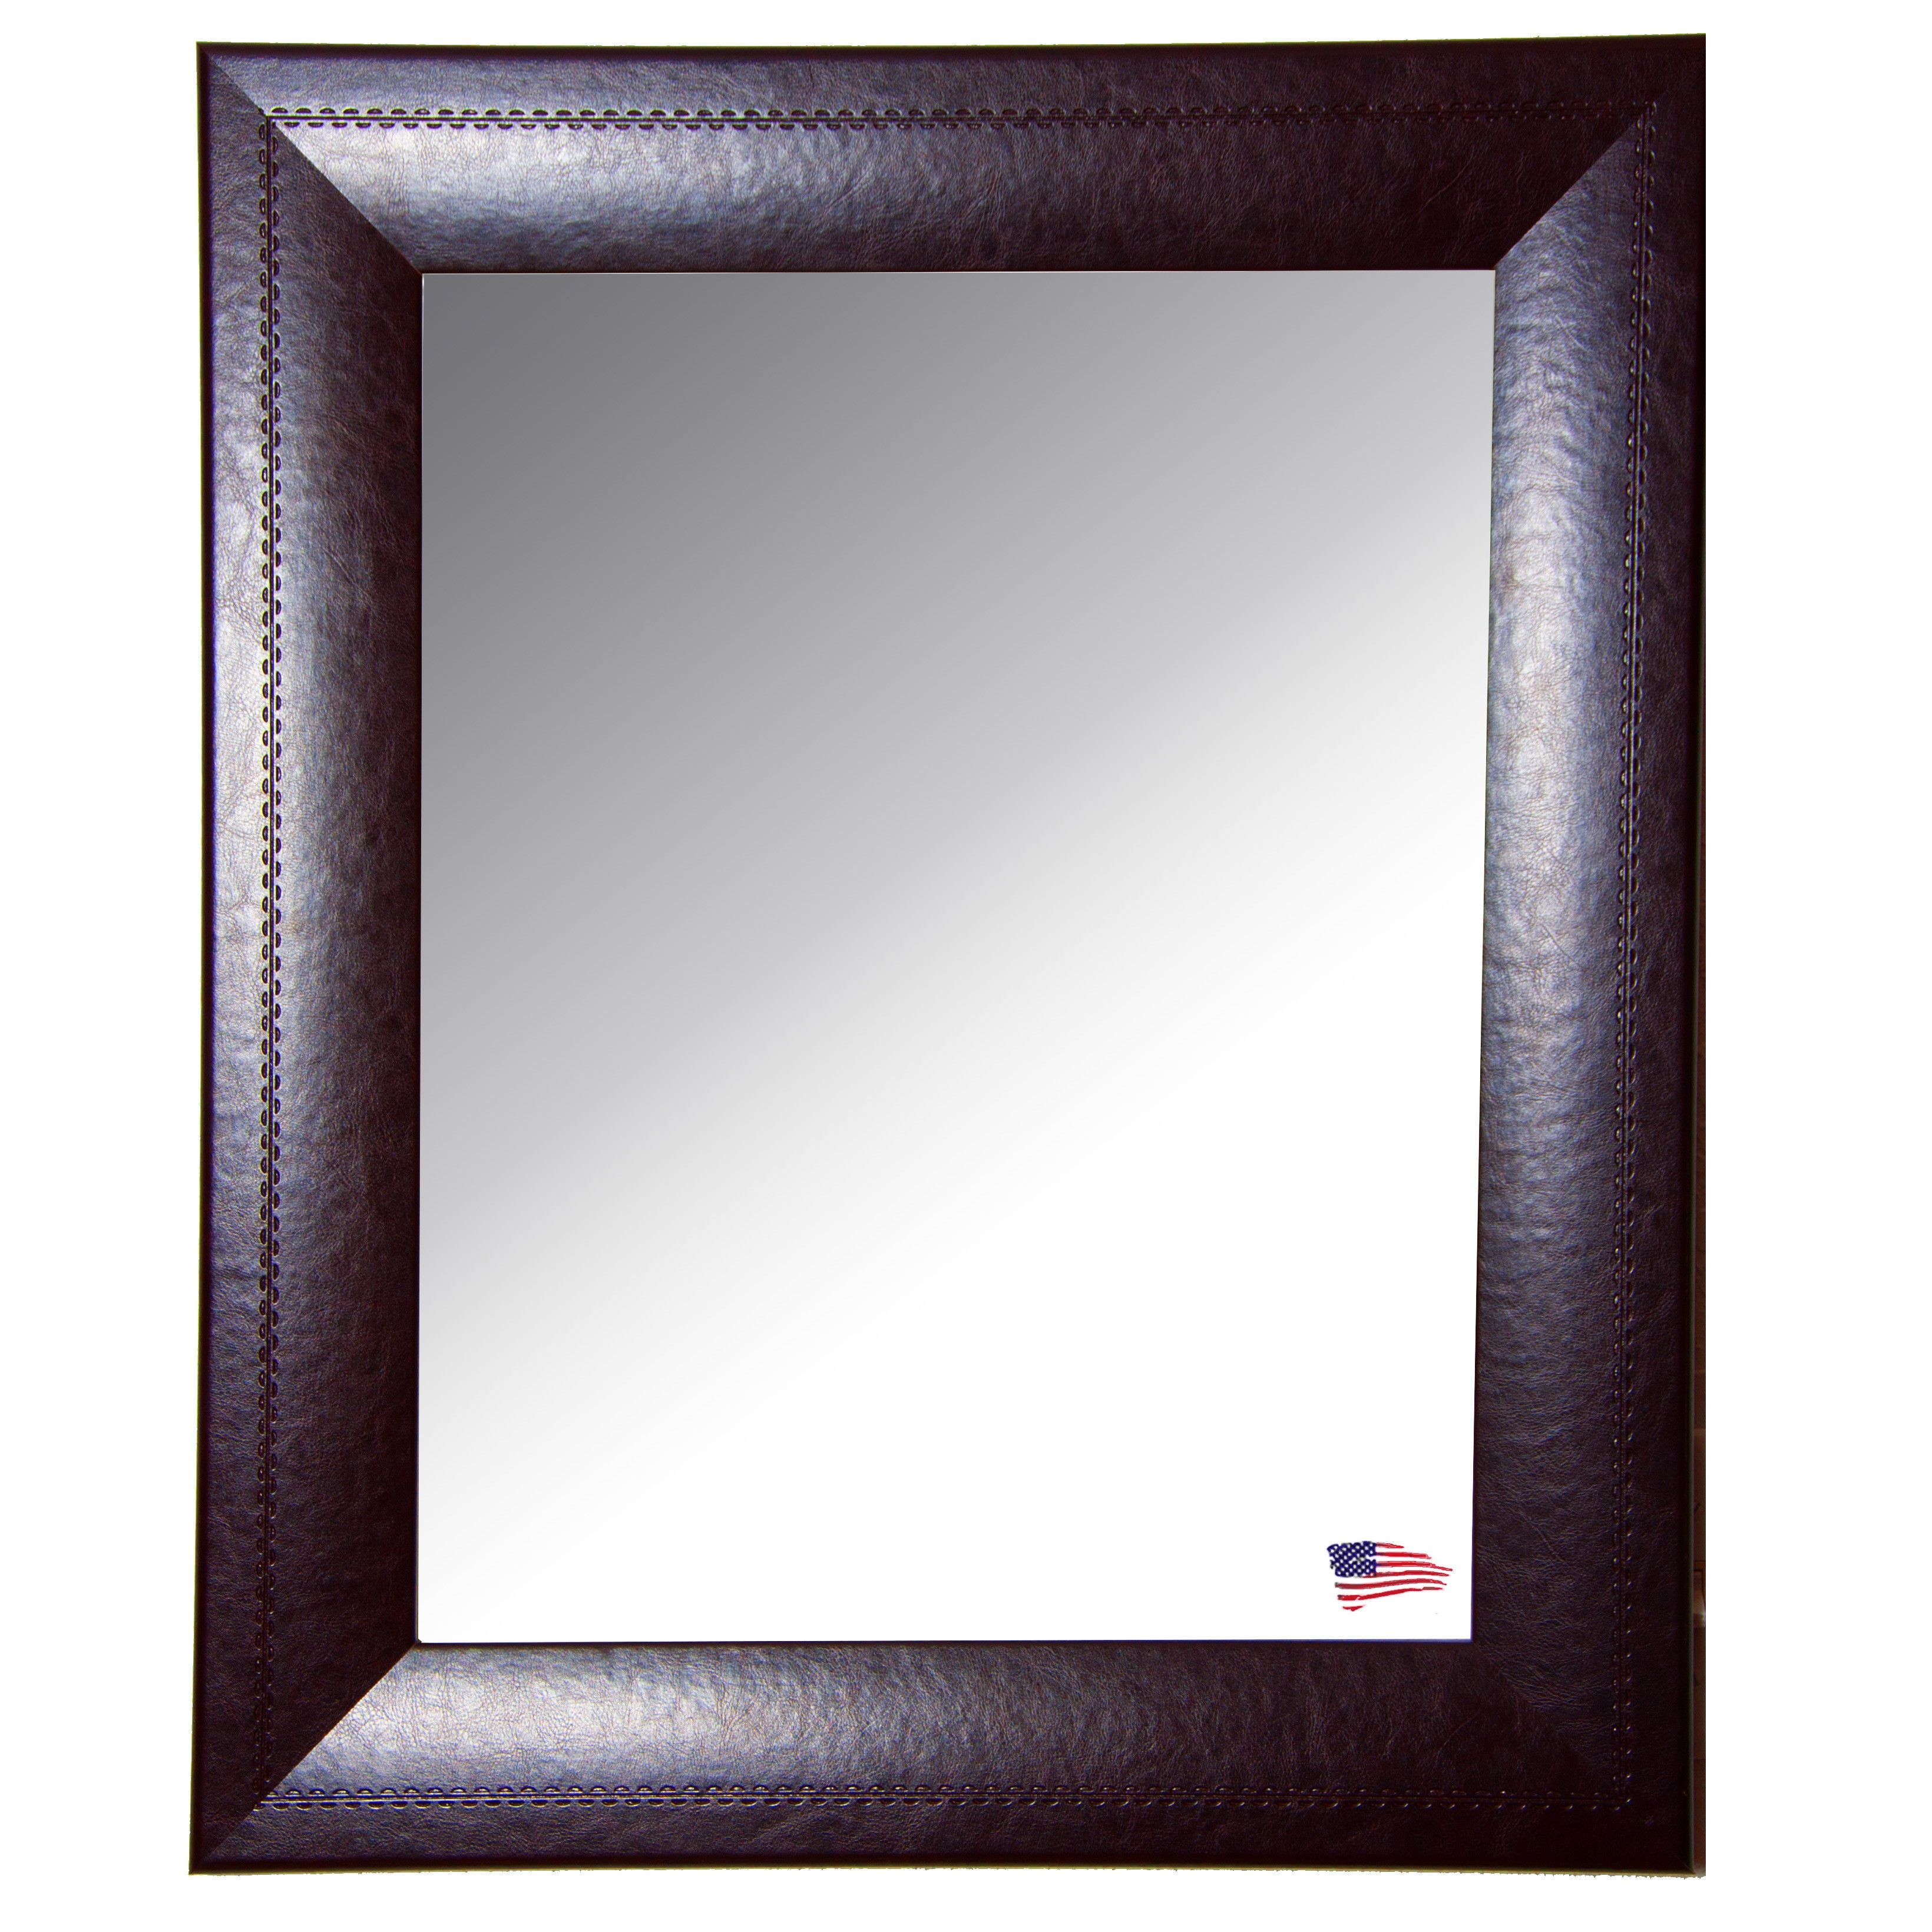 Brownchrome Leather Wall Mirror Allmodern Pertaining To Leather Wall Mirrors (View 6 of 15)